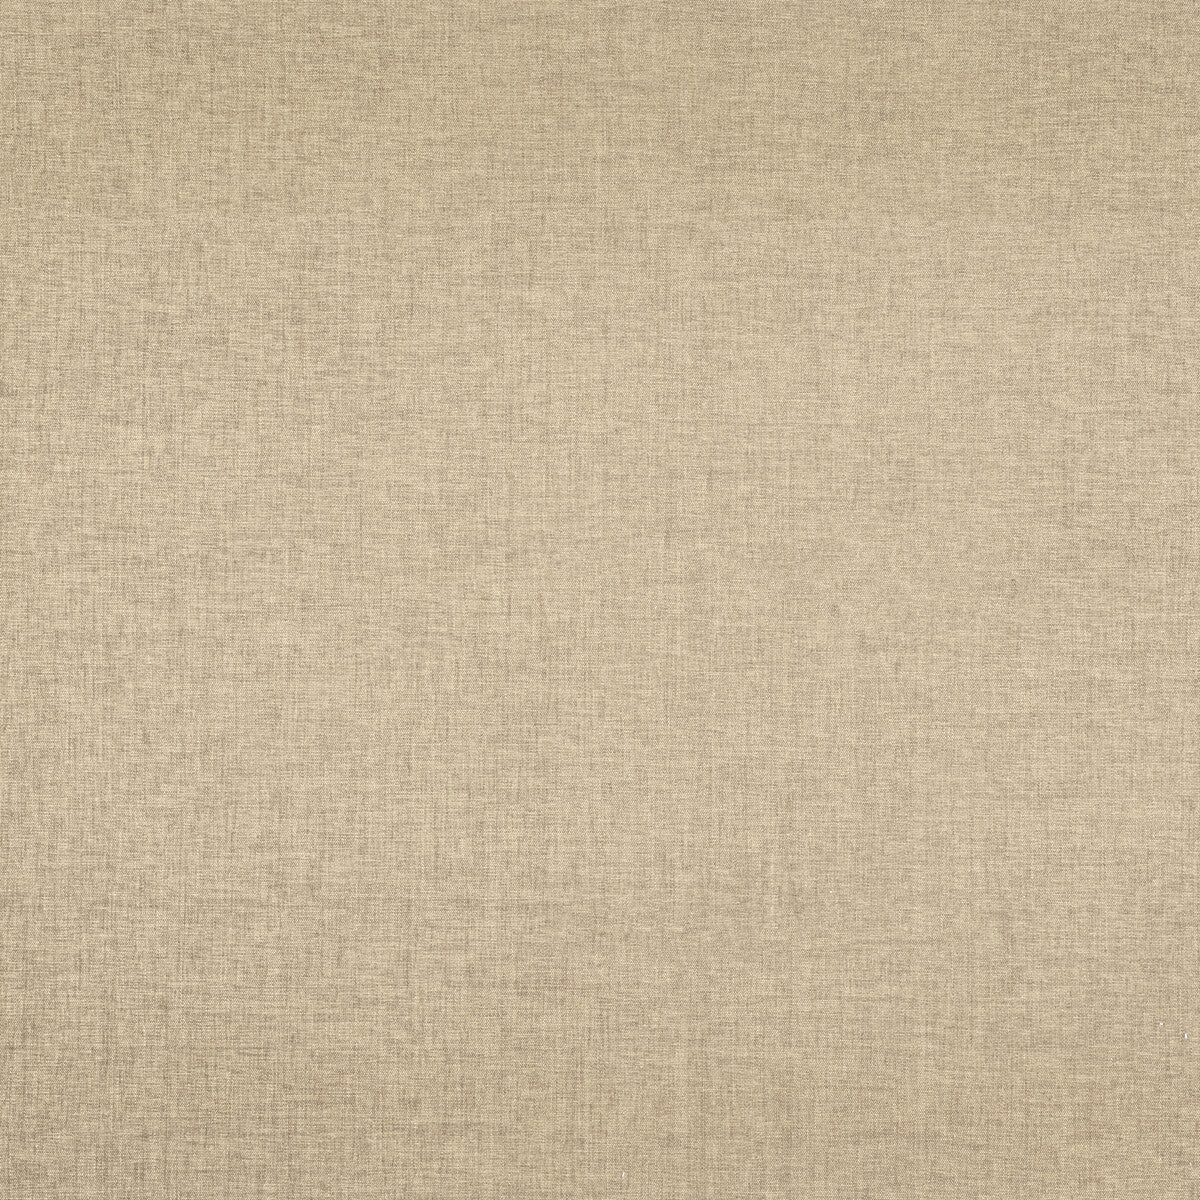 Kravet Smart fabric in 36095-1611 color - pattern 36095.1611.0 - by Kravet Smart in the Eco-Friendly Chenille collection